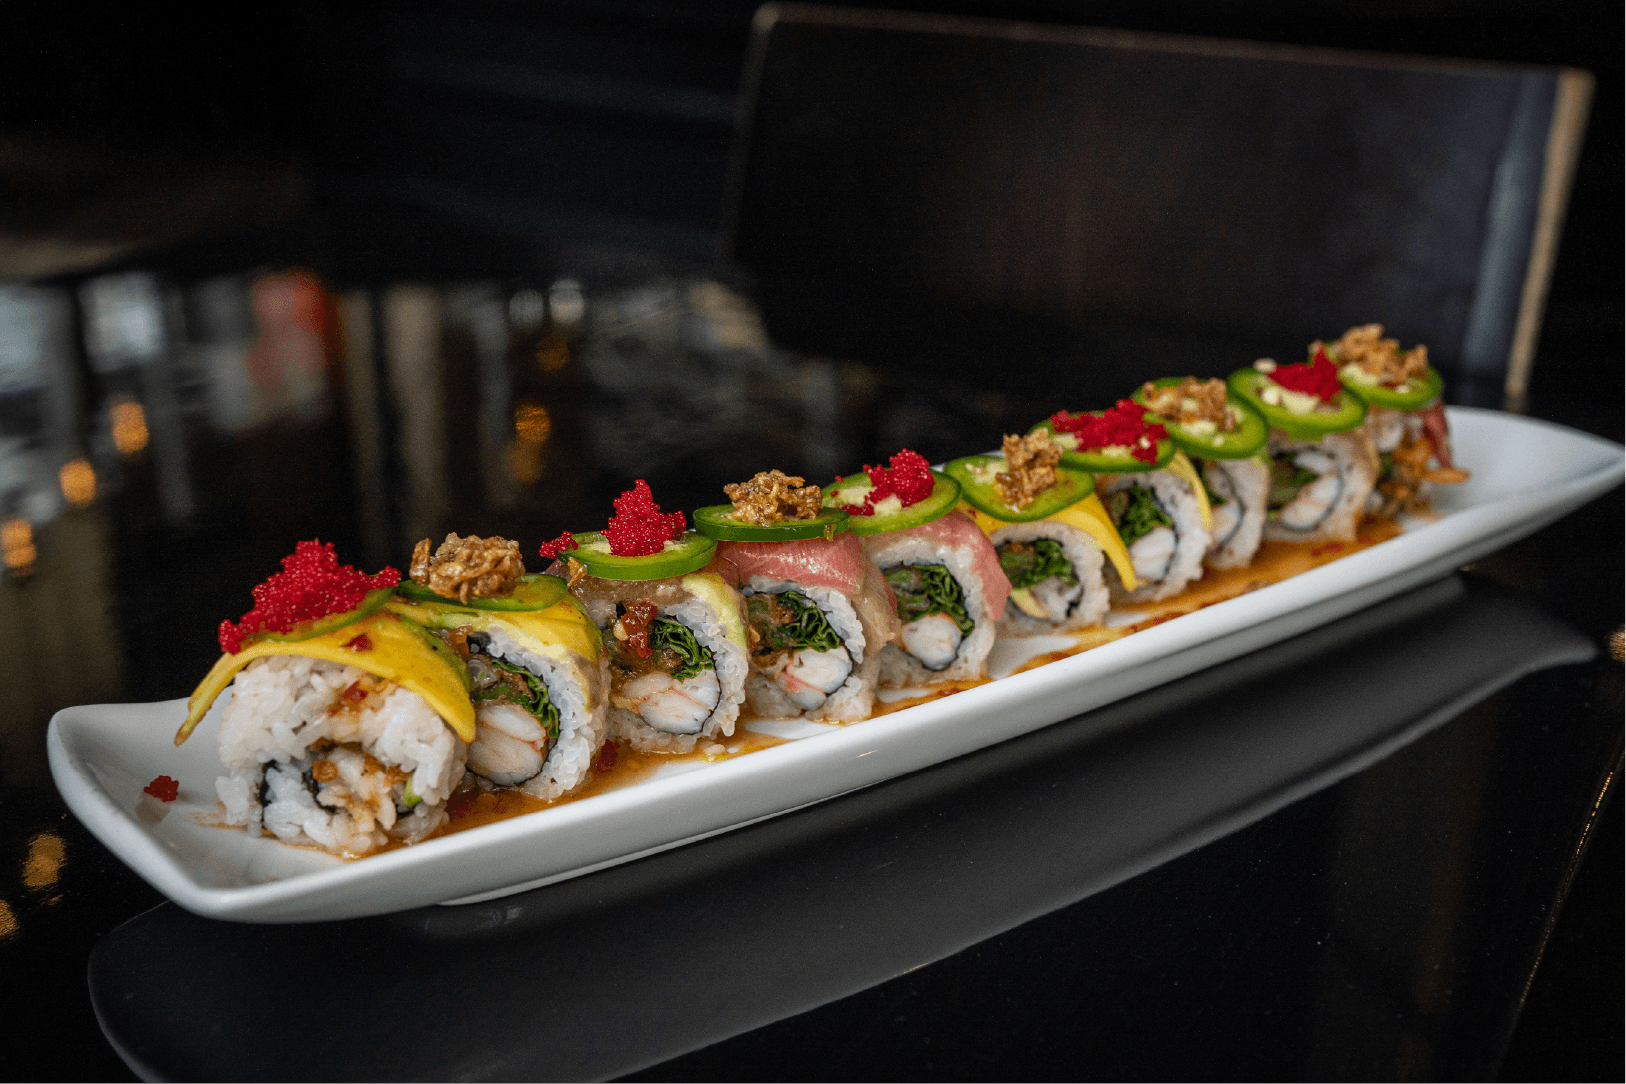 Hawaiian Girlfriend roll. Spicy yellowtail, sea asparagus, avocado, topped with tuna and salmon, ogo, sesame, garlic, chili, and a jalapeno citrus sauce